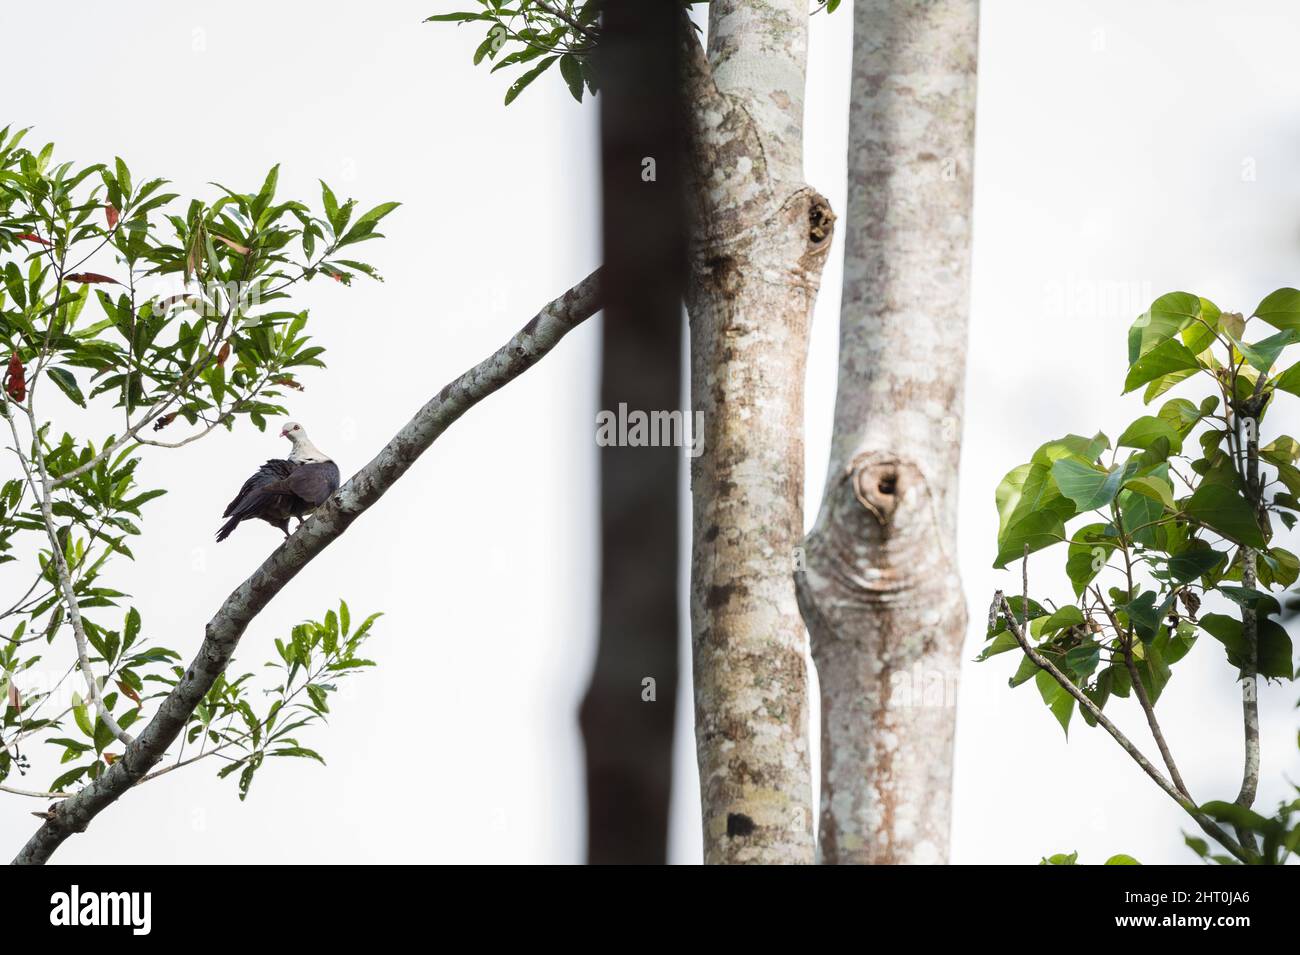 Environmental portrait in Yungaburra, QLD, Australia, of White-headed pigeon high on a forest limb, looking back at camera while attempting to preen. Stock Photo